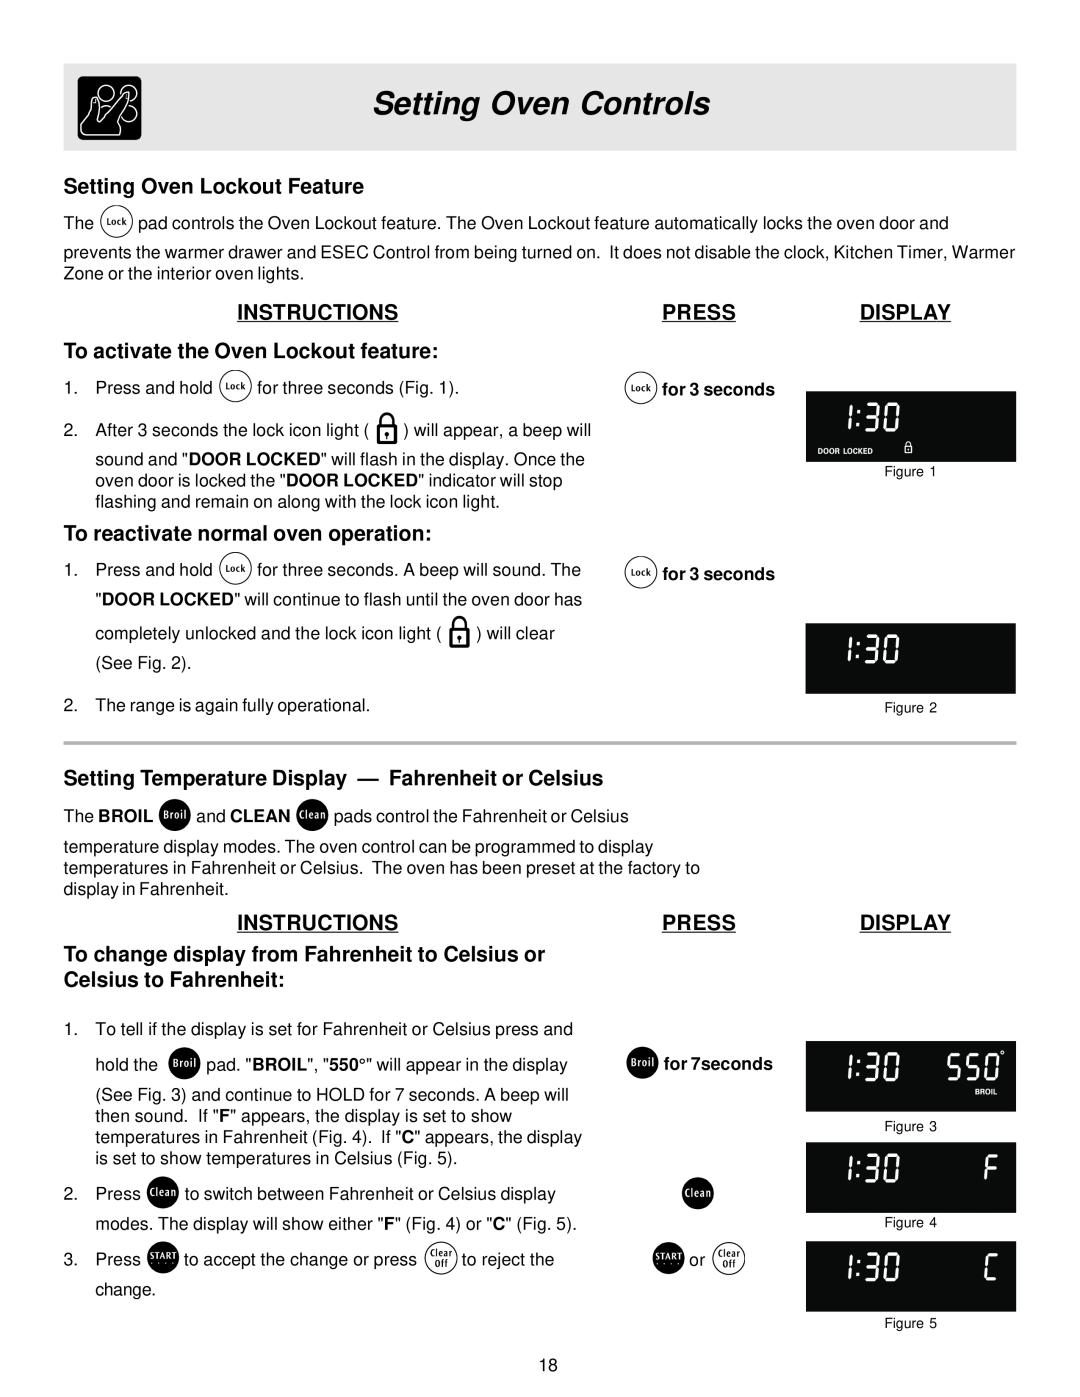 Frigidaire ES40 Setting Oven Lockout Feature, INSTRUCTIONS To activate the Oven Lockout feature, Pressdisplay, Display 